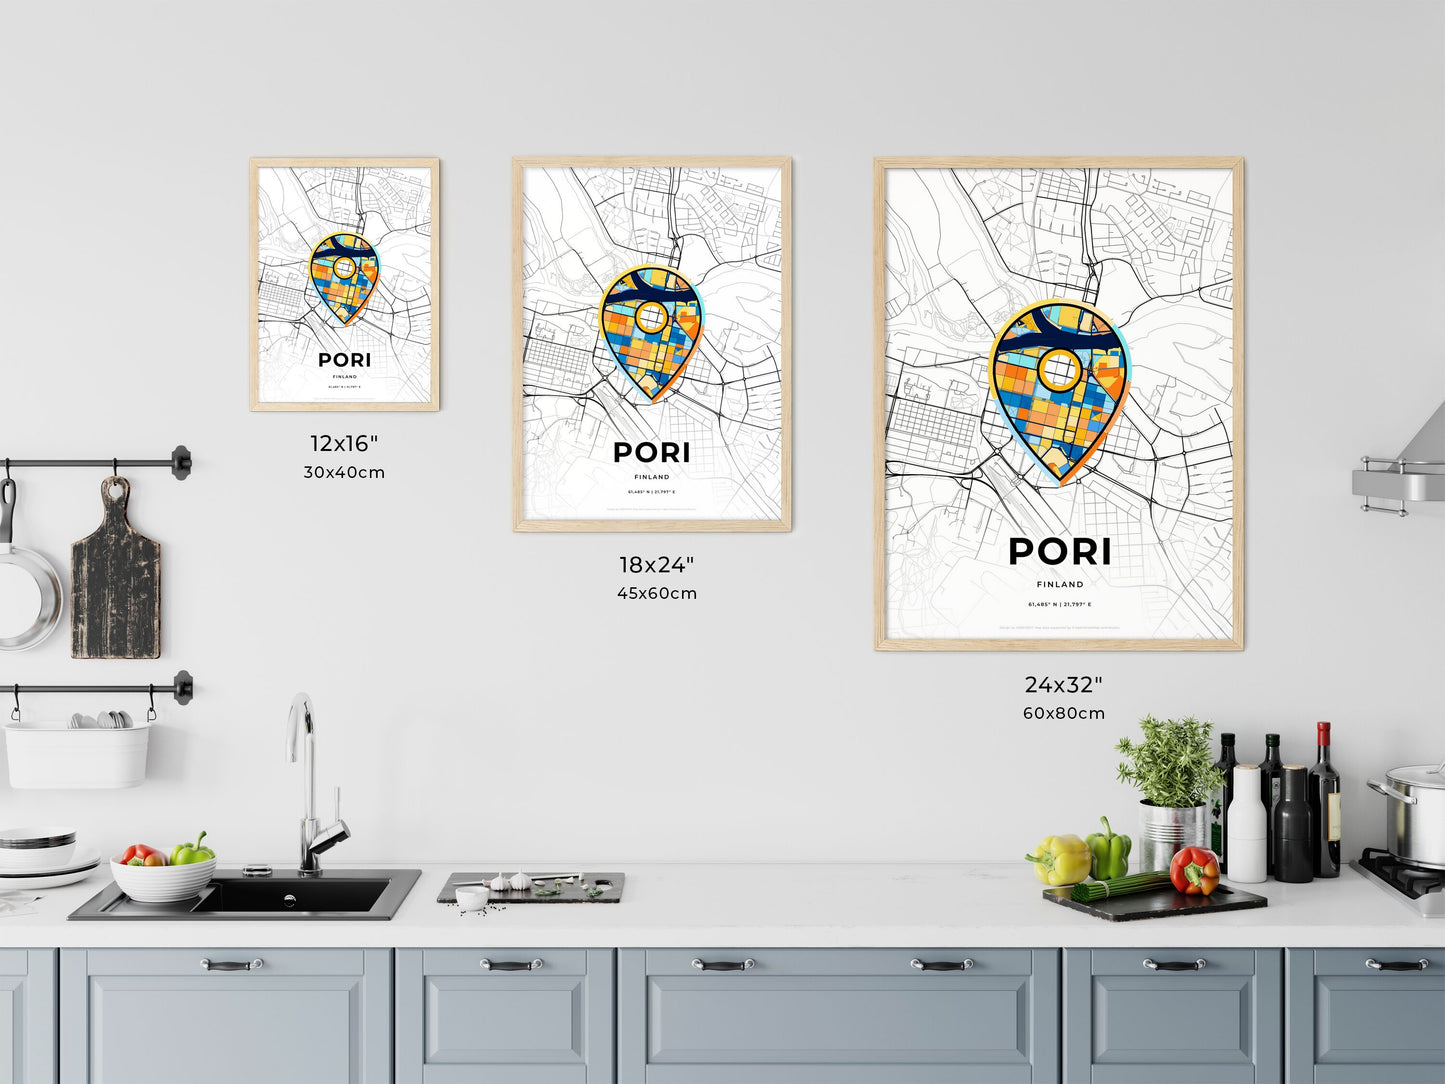 PORI FINLAND minimal art map with a colorful icon. Where it all began, Couple map gift.